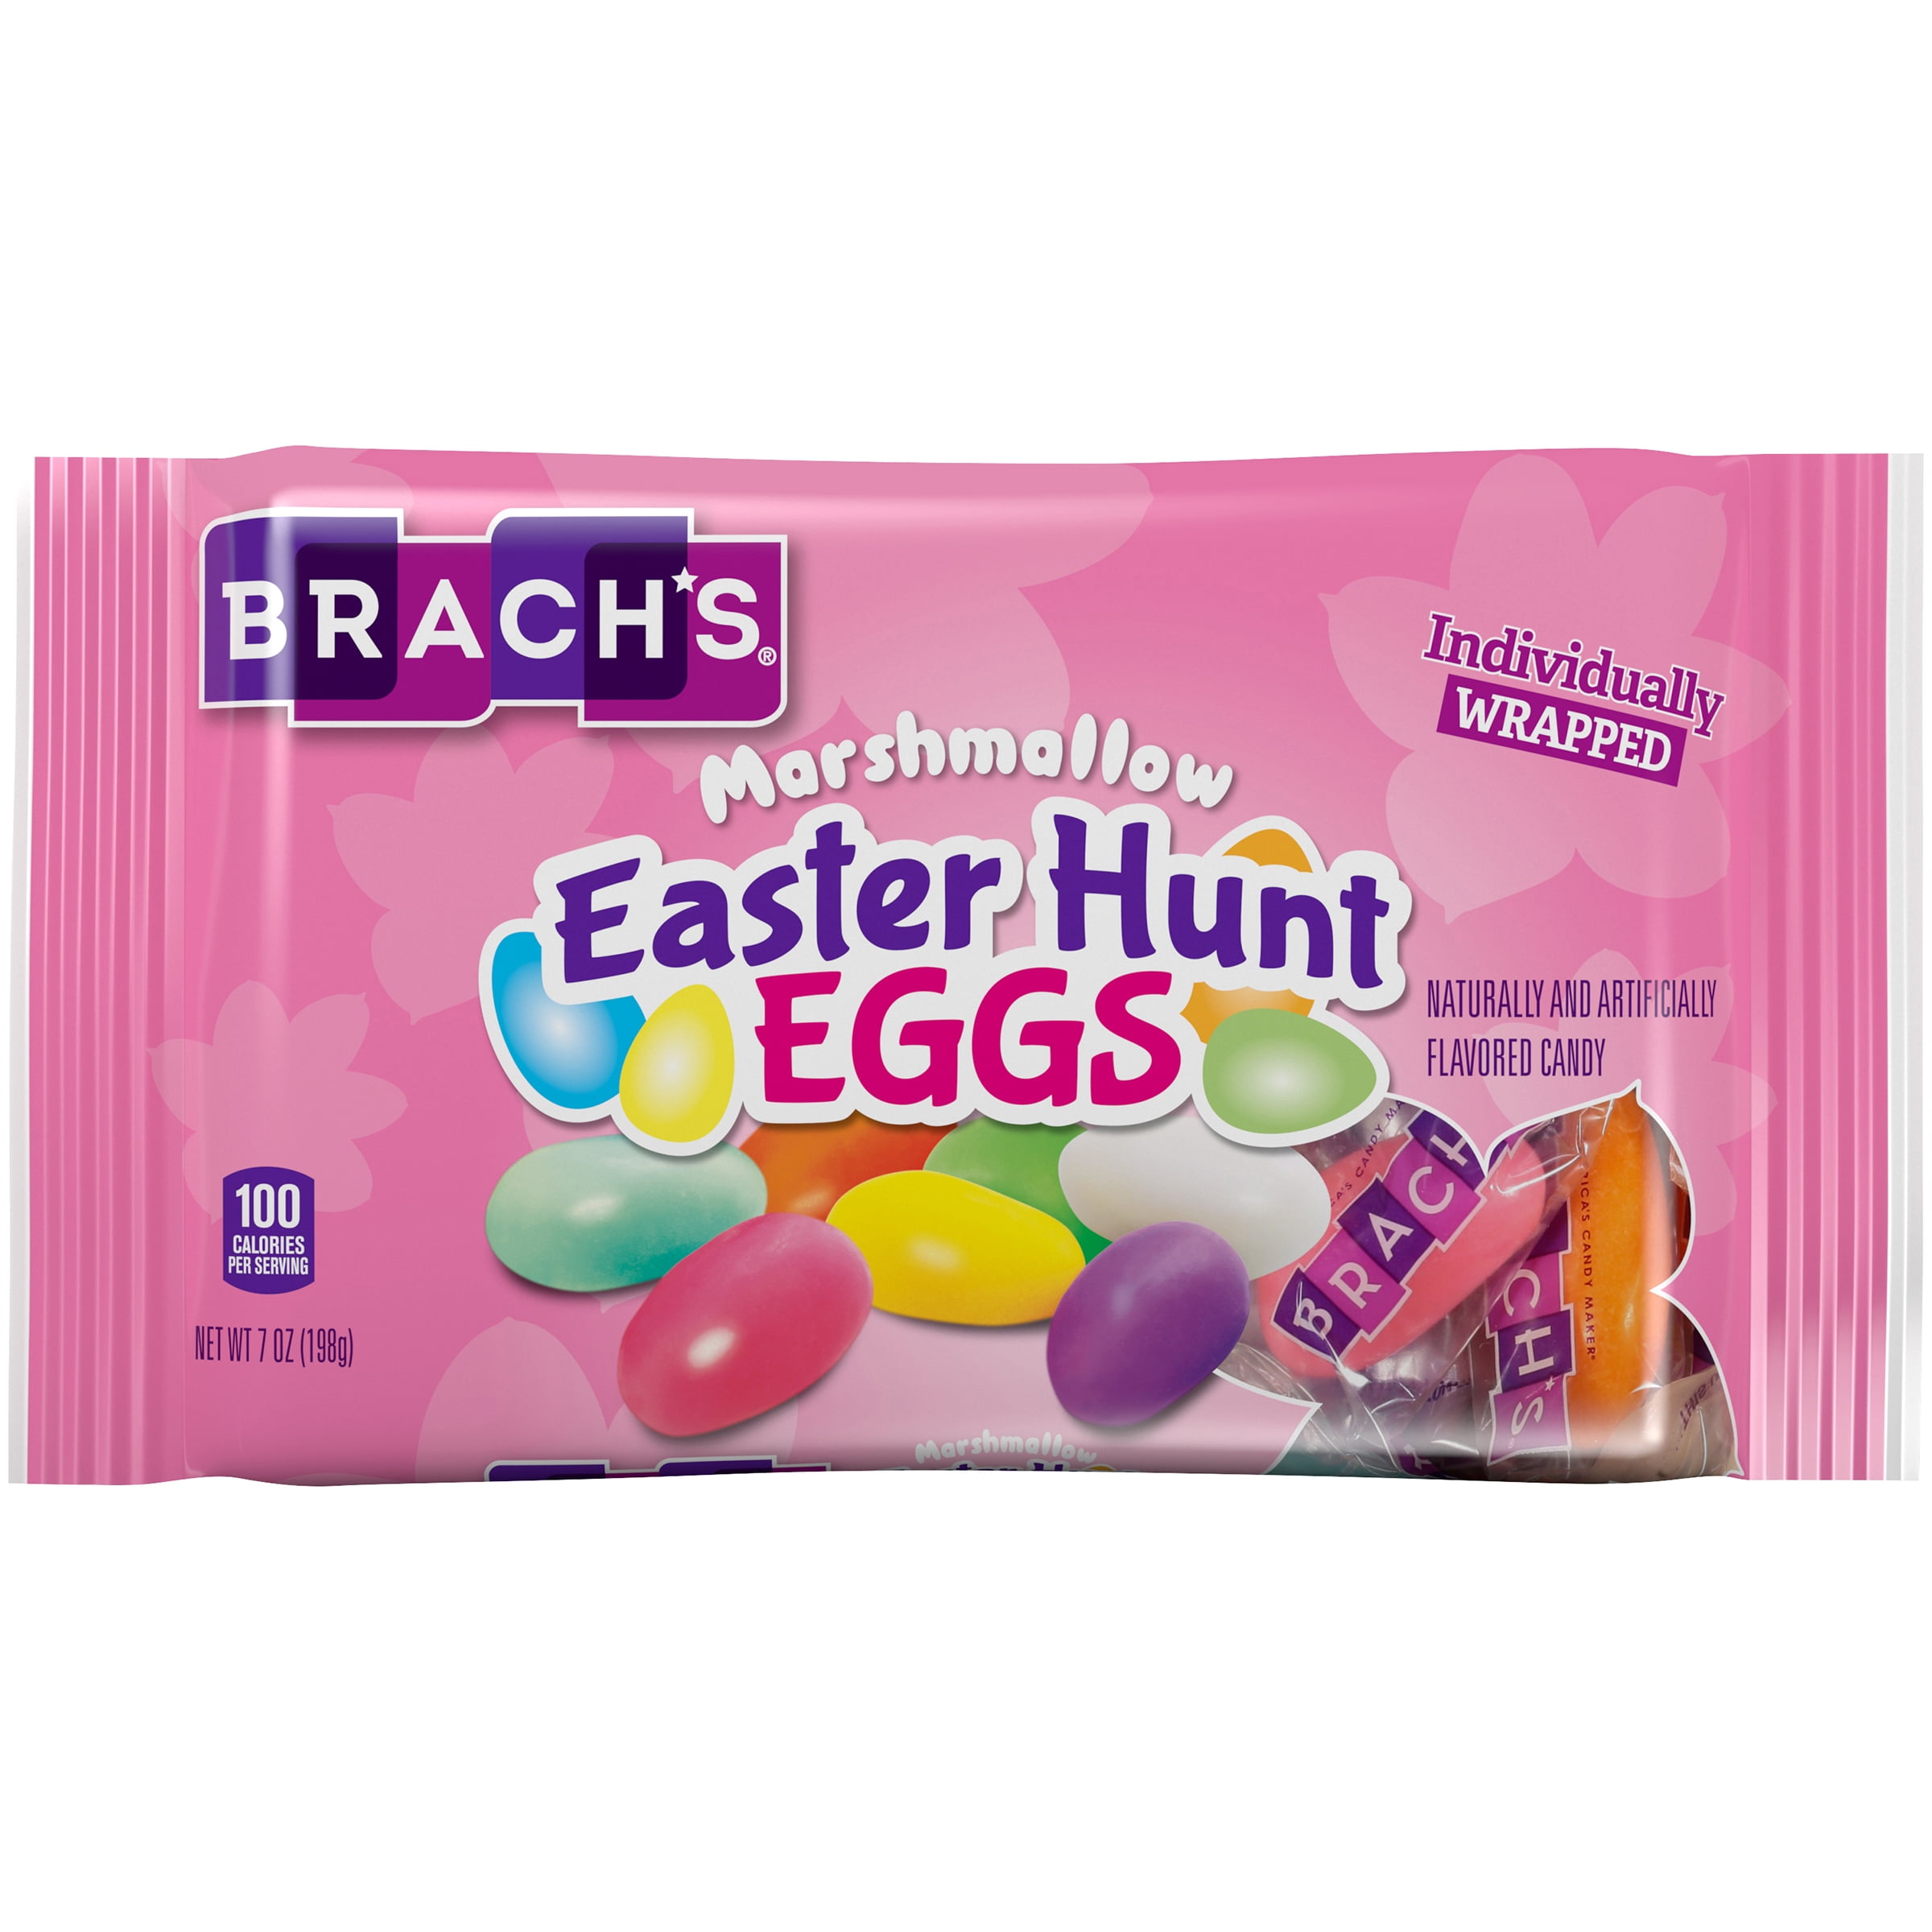 Candy coated marshmallow easter eggs